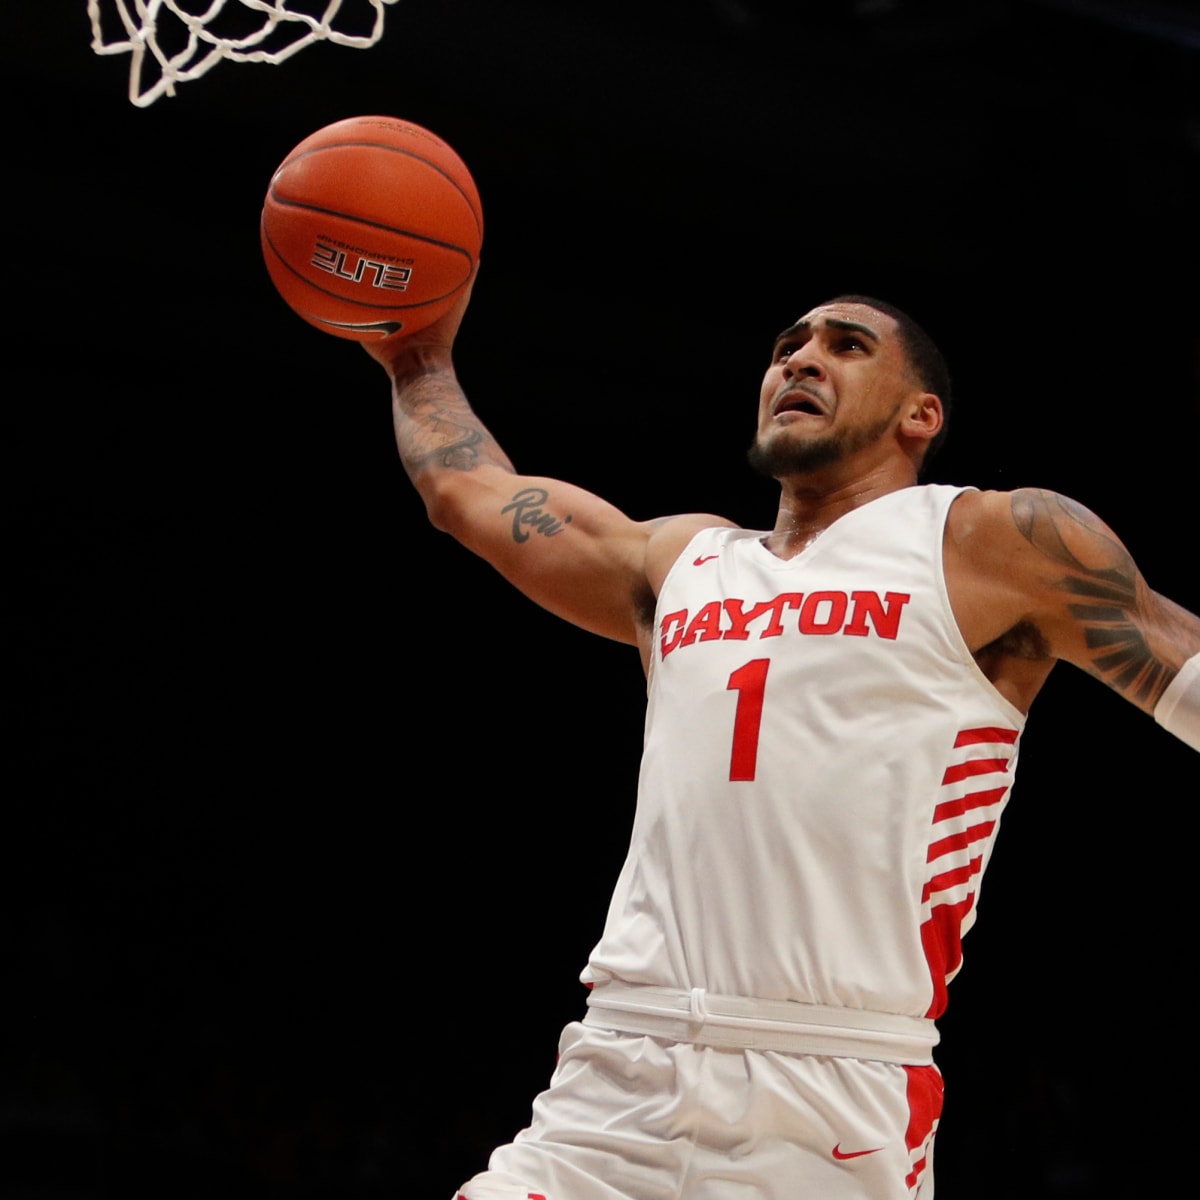 Obi Toppin of Dayton Flyers named AP National Player of the Year